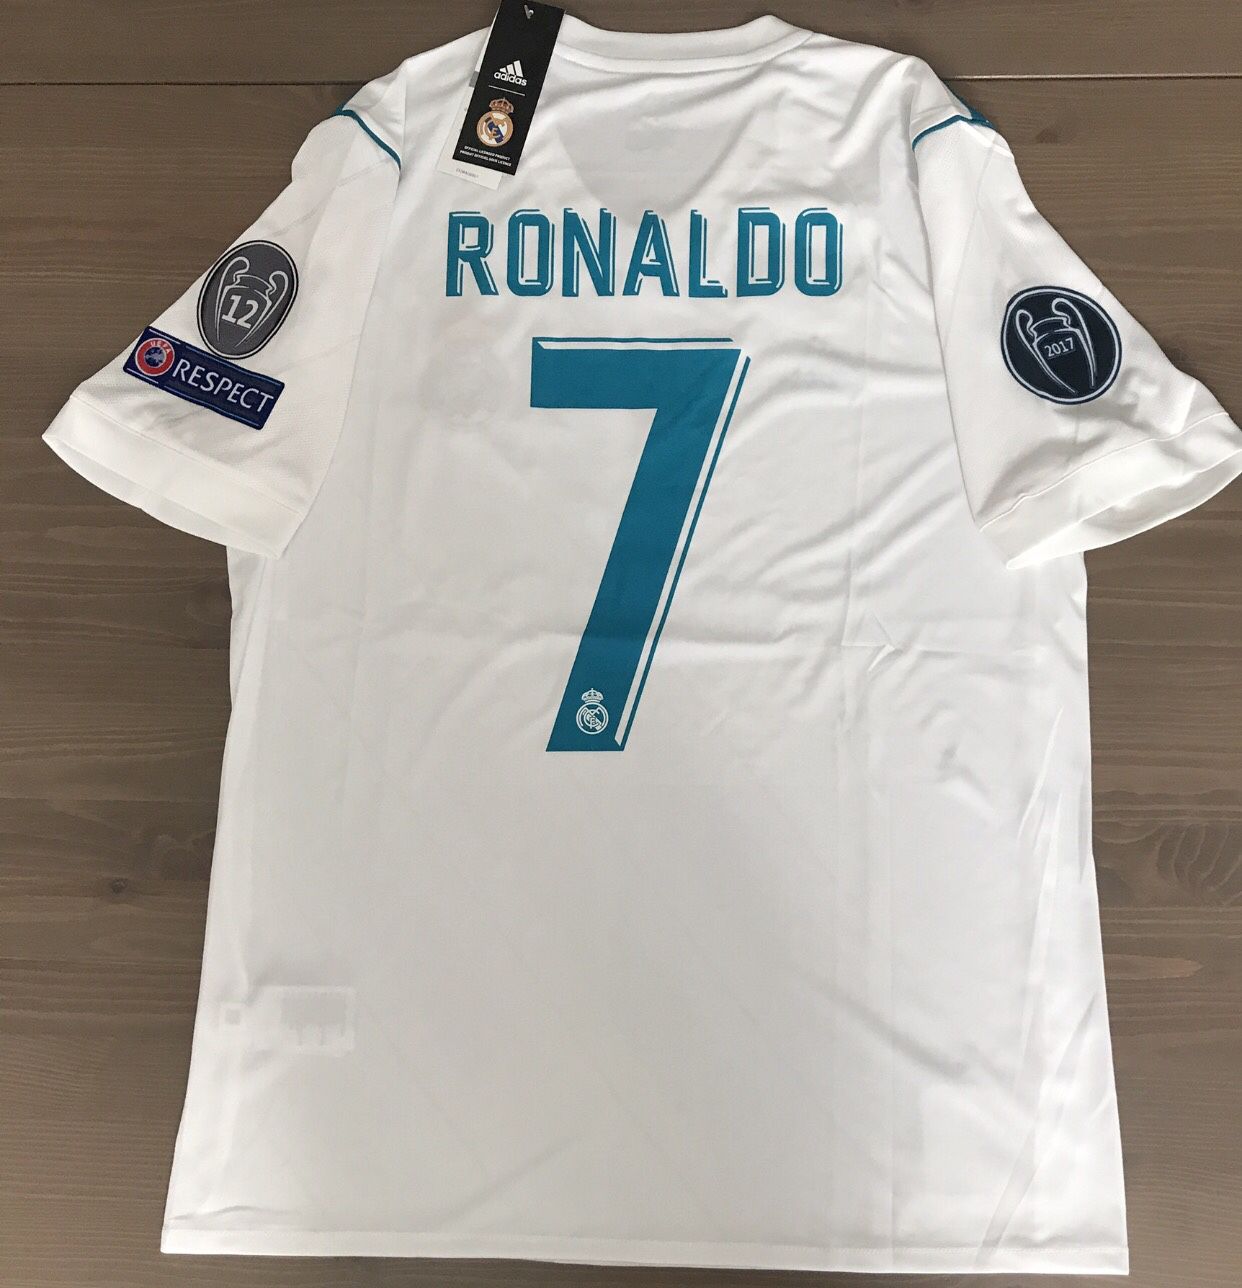 Juventus home Soccer Jersey Adidas no name no number champions league  patches for Sale in Miami, FL - OfferUp